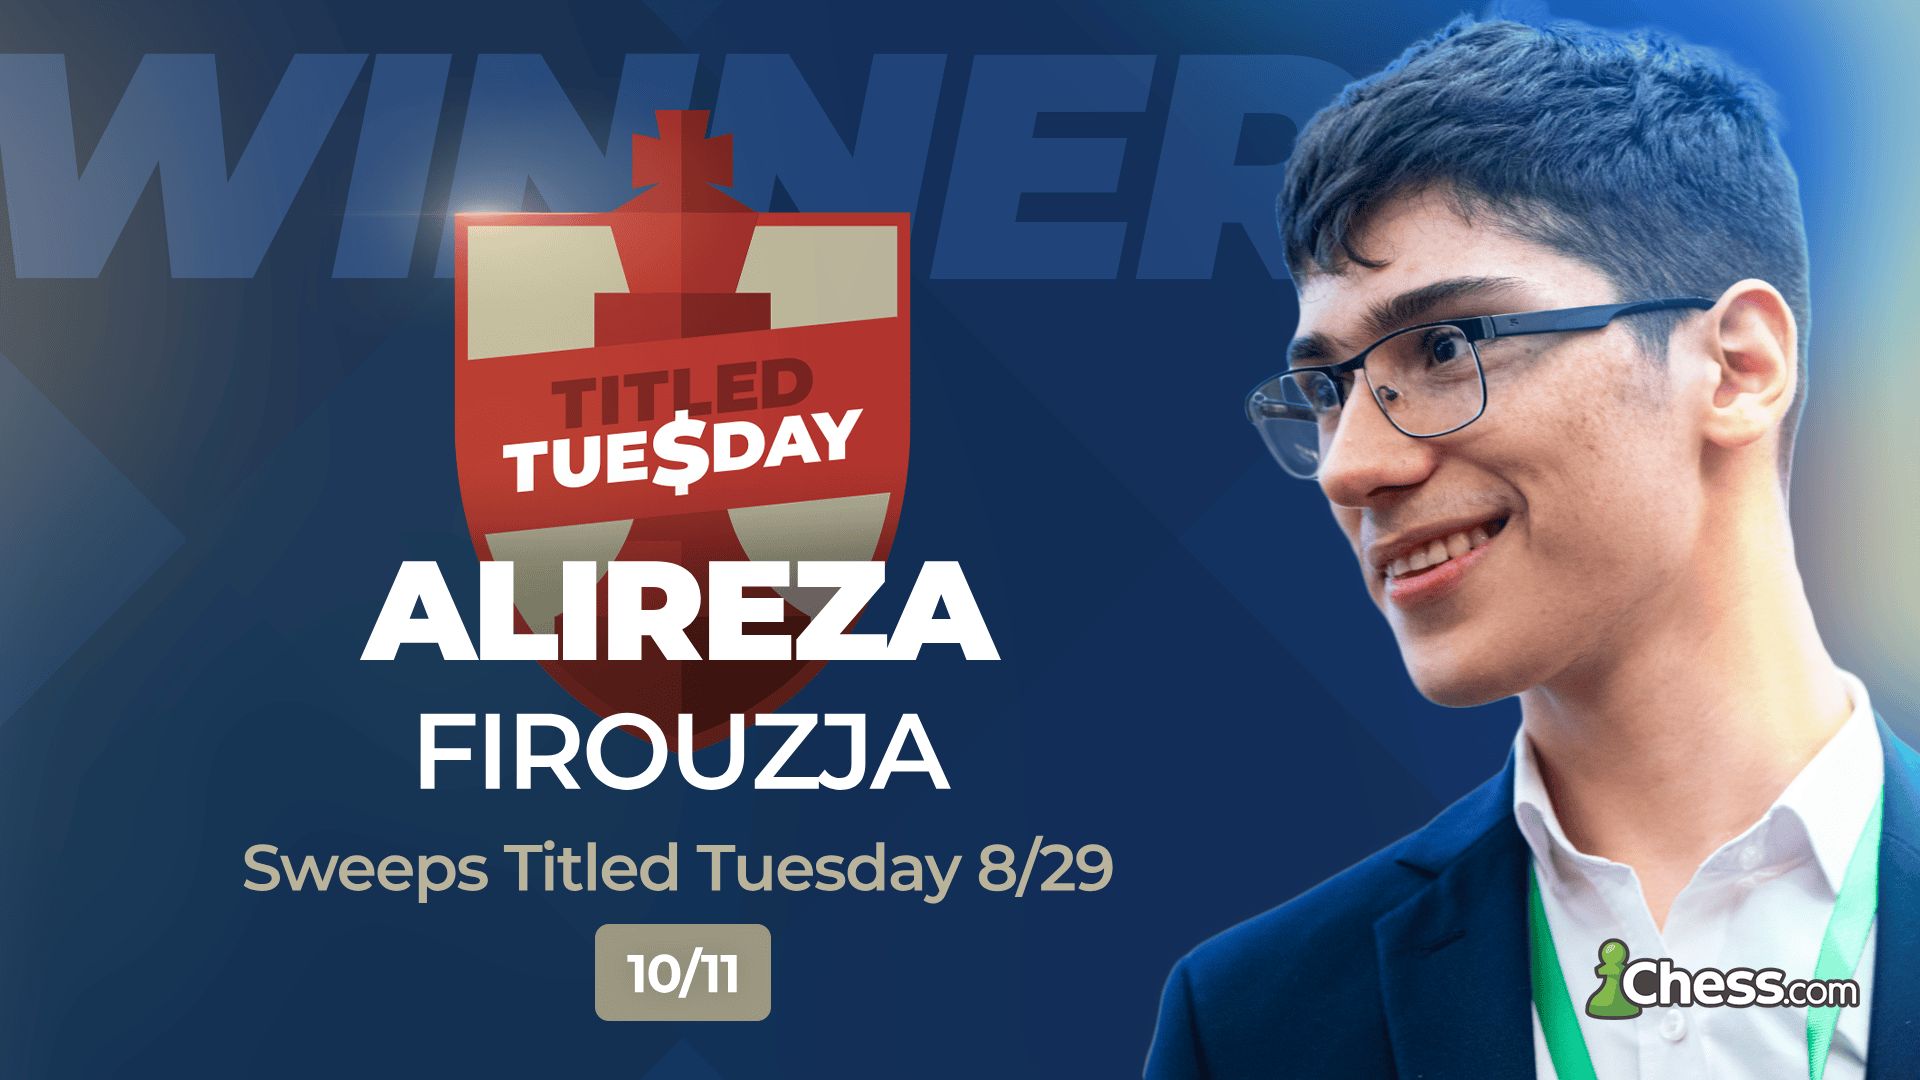 Firouzja Joins The Titled Tuesday Sweep Club 